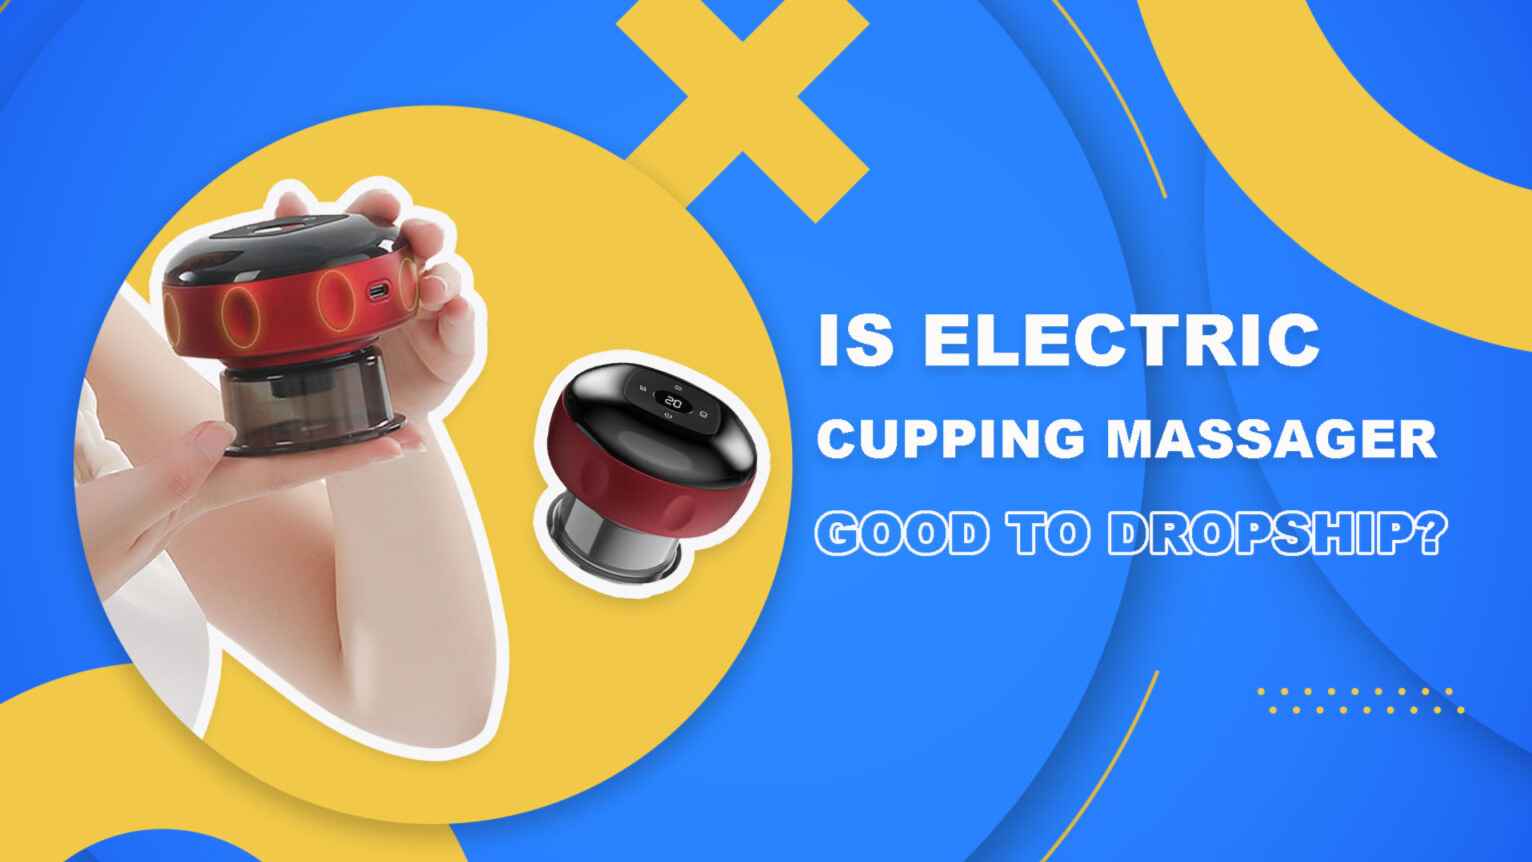 https://cc-west-usa.oss-accelerate.aliyuncs.com/postsAndPages/2022/08/05/1659667657088_Is-Electric-Cupping-Massager-a-Good-Product-to-Dropship-1536x864.jpg